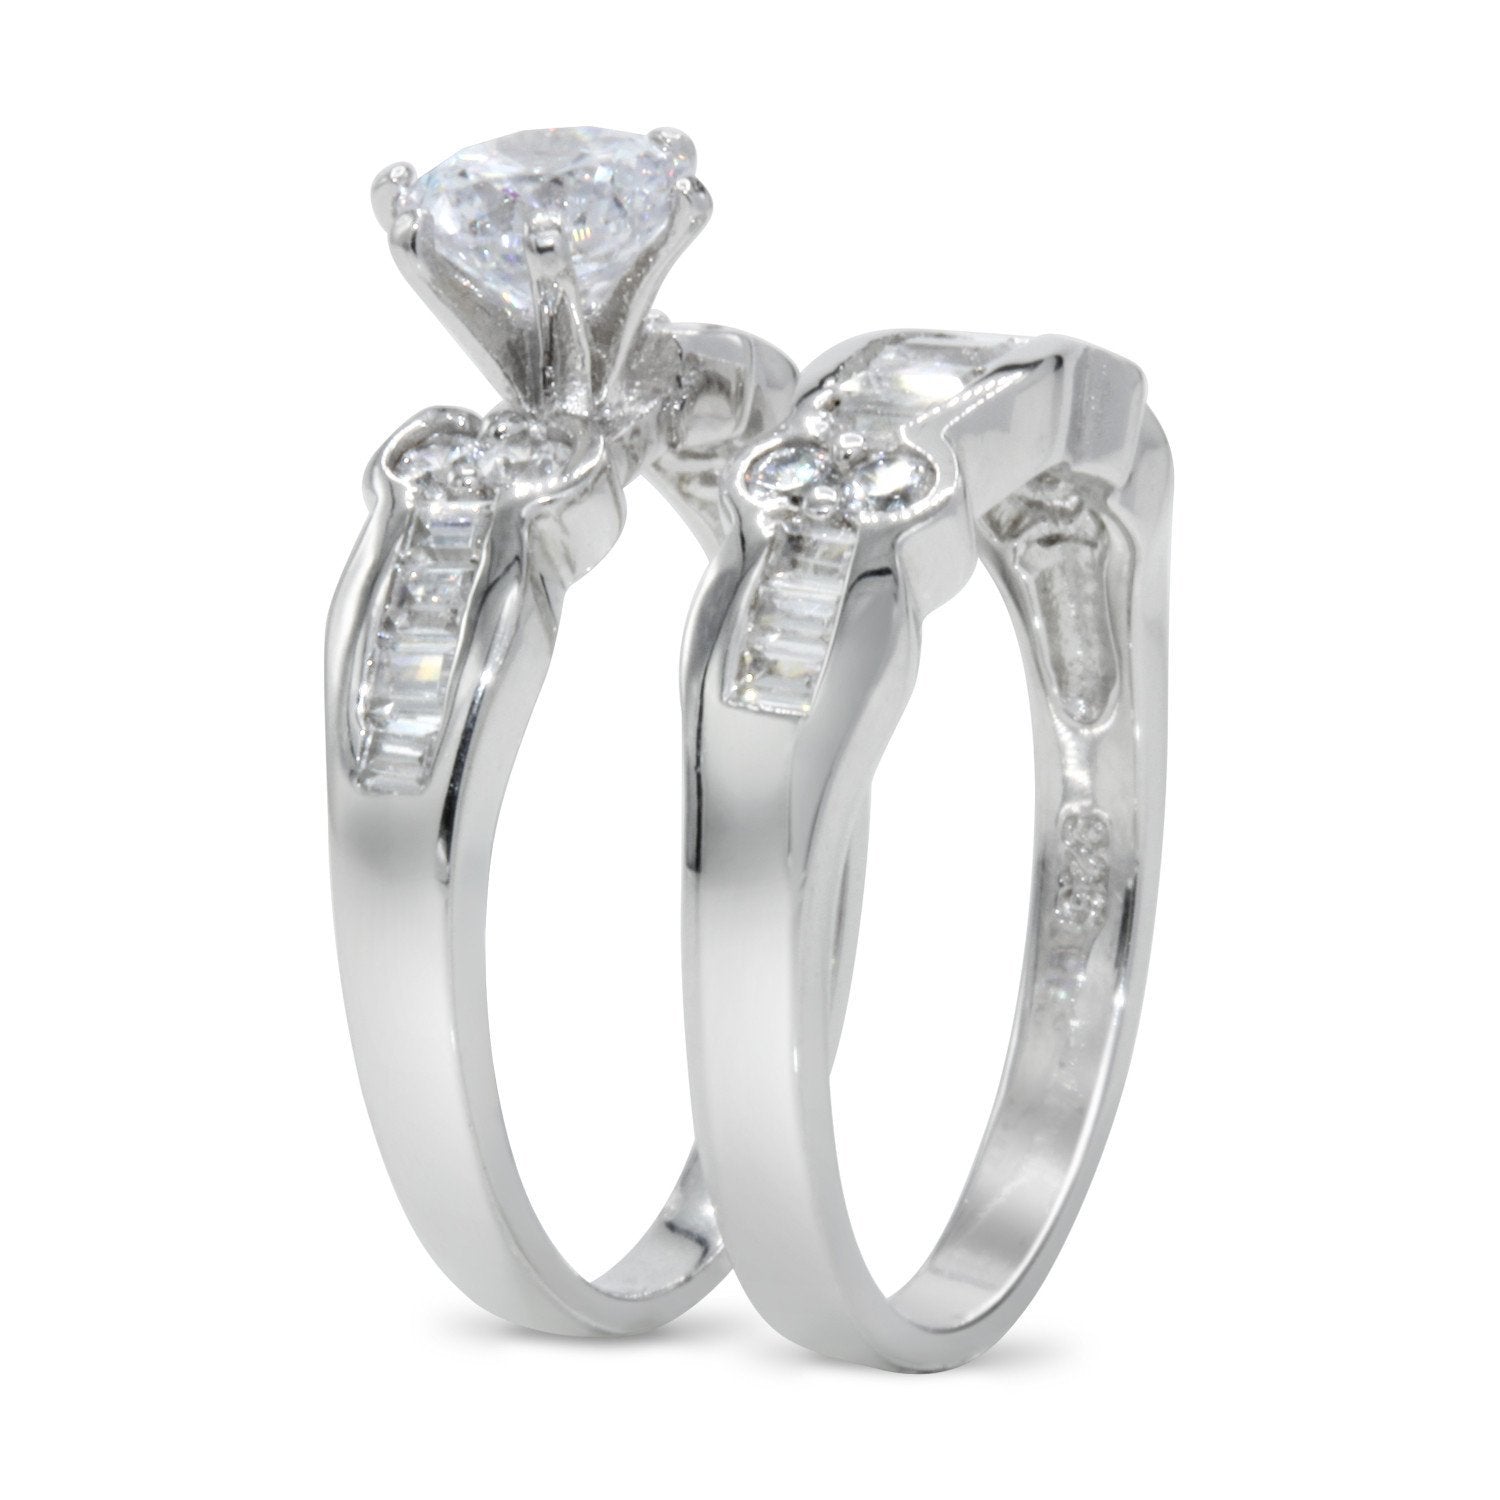 CZ 5mm Center Stone Sterling Silver Plated Crossover Halo Wedding Bridal Set, Engagement Ring